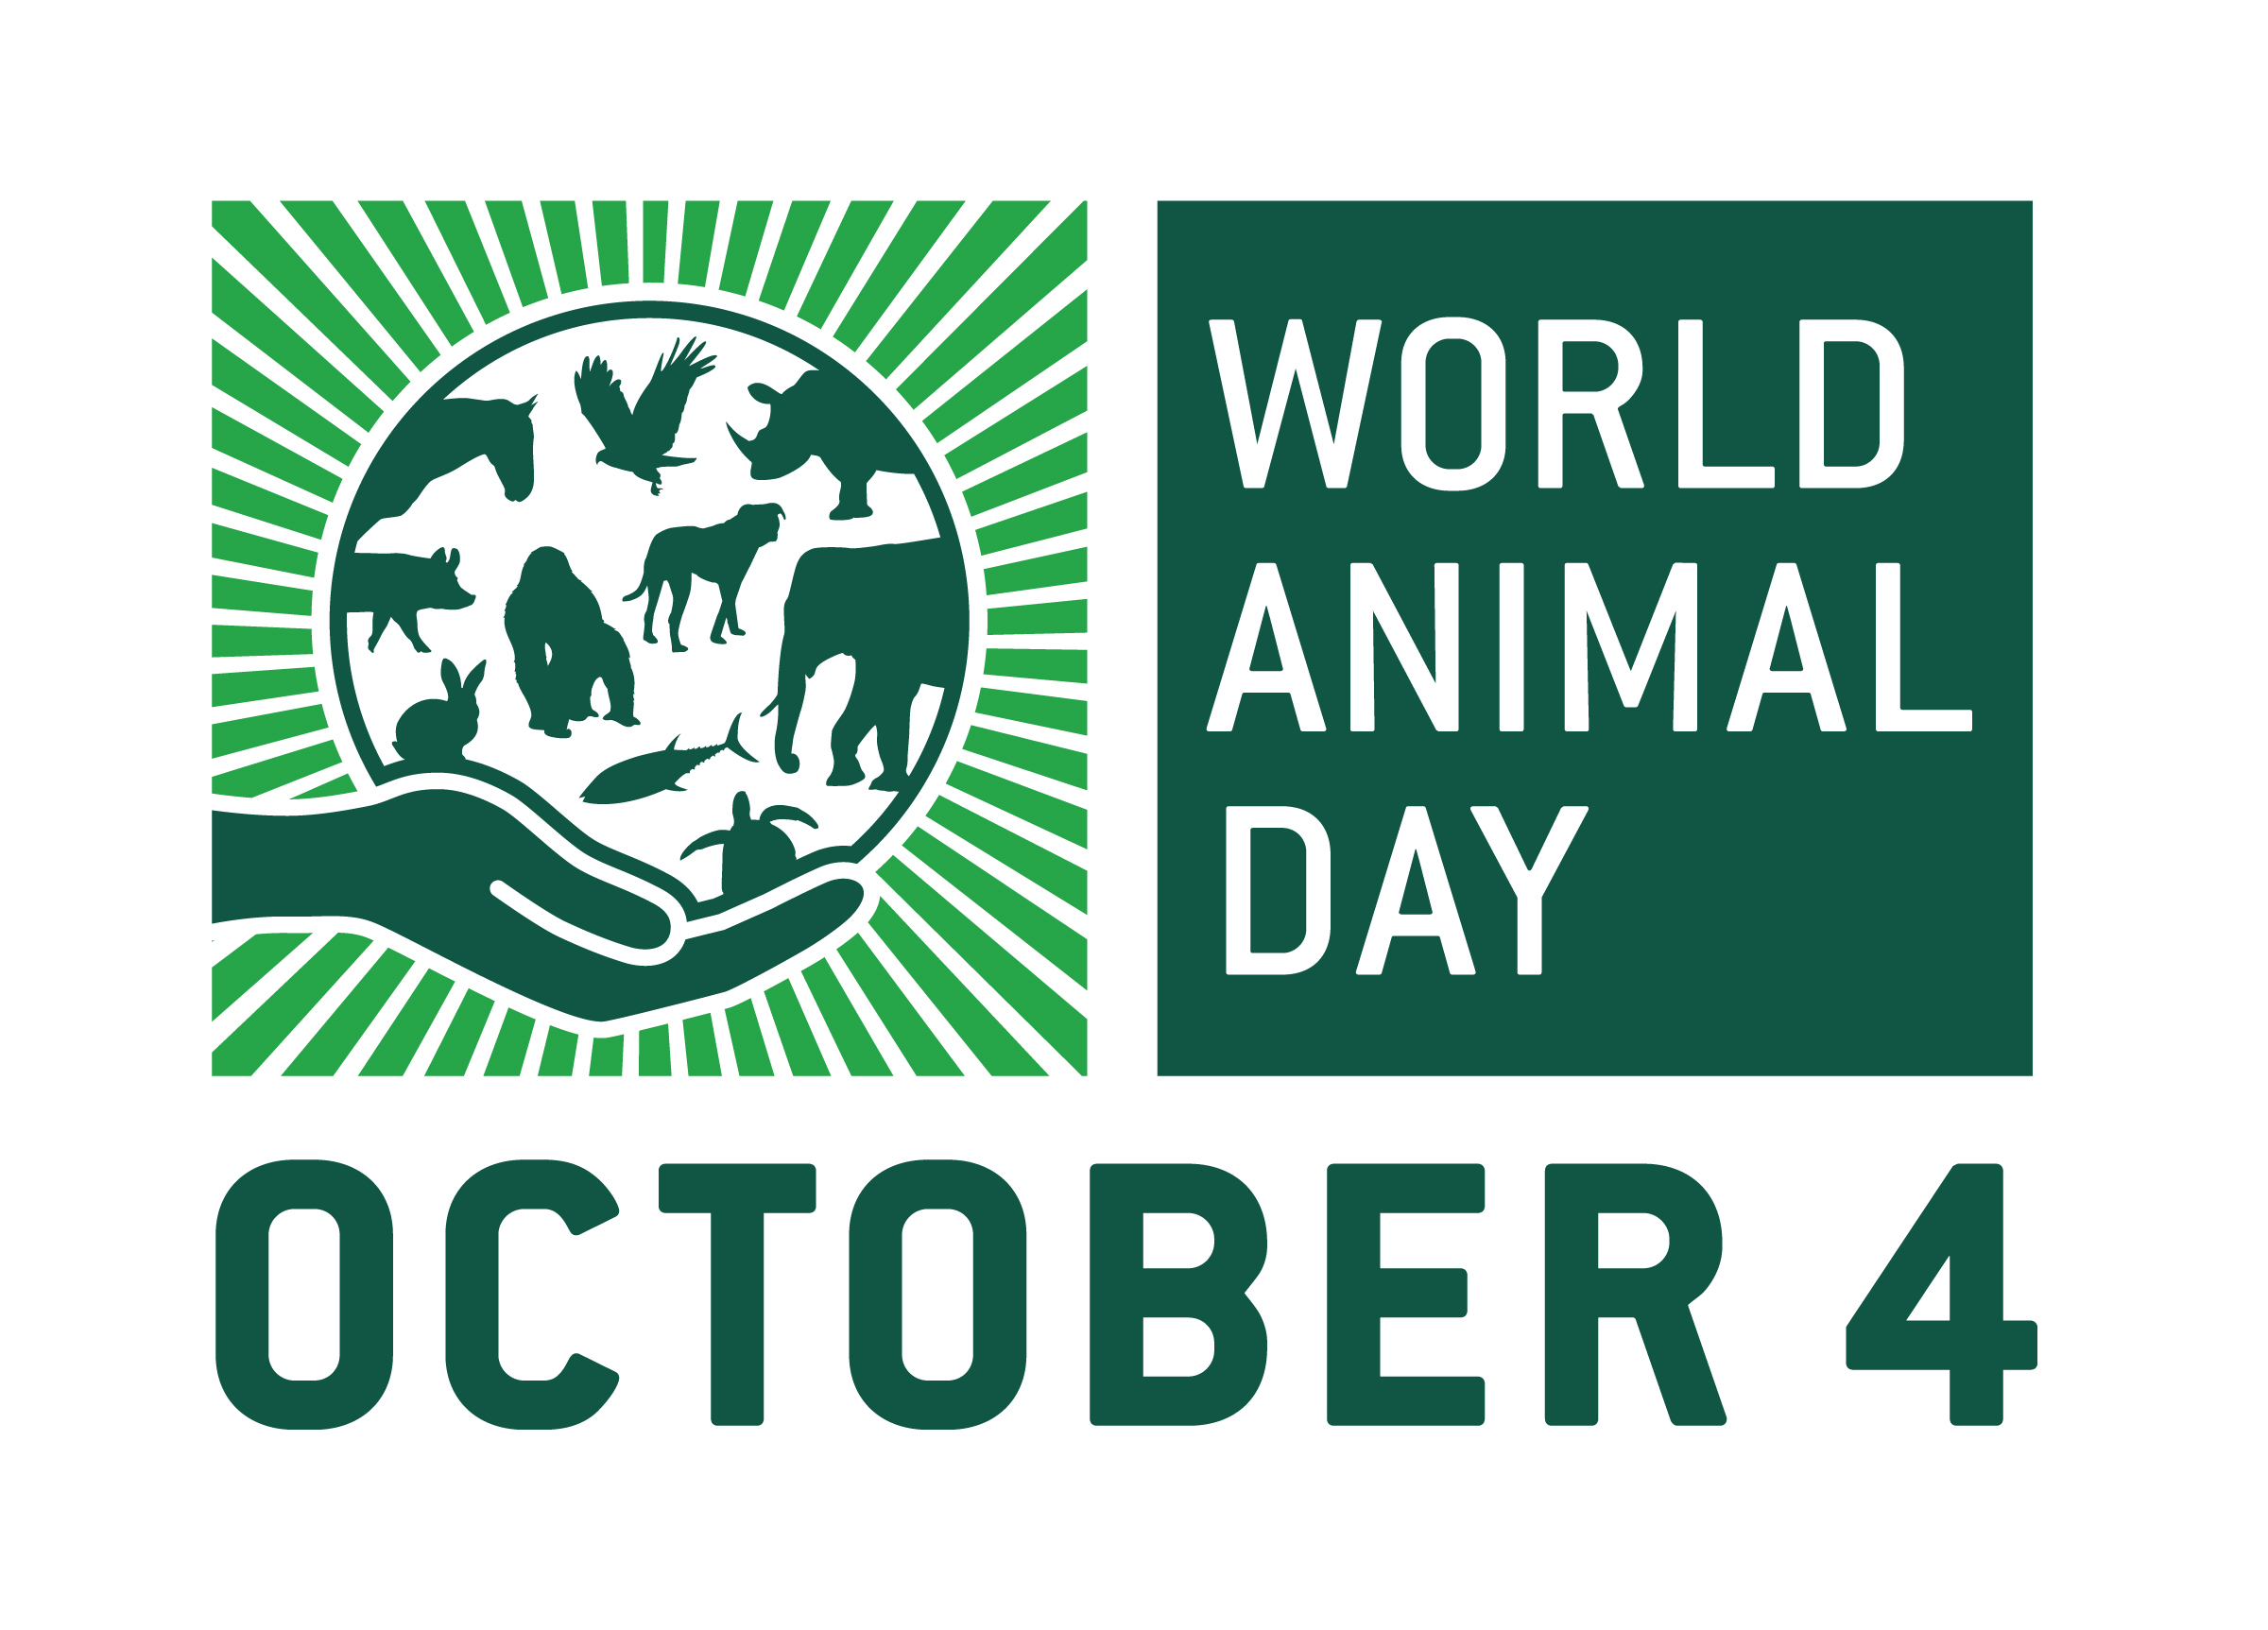 World Animal Day 2016: Let's Celebrate Animals Every Day